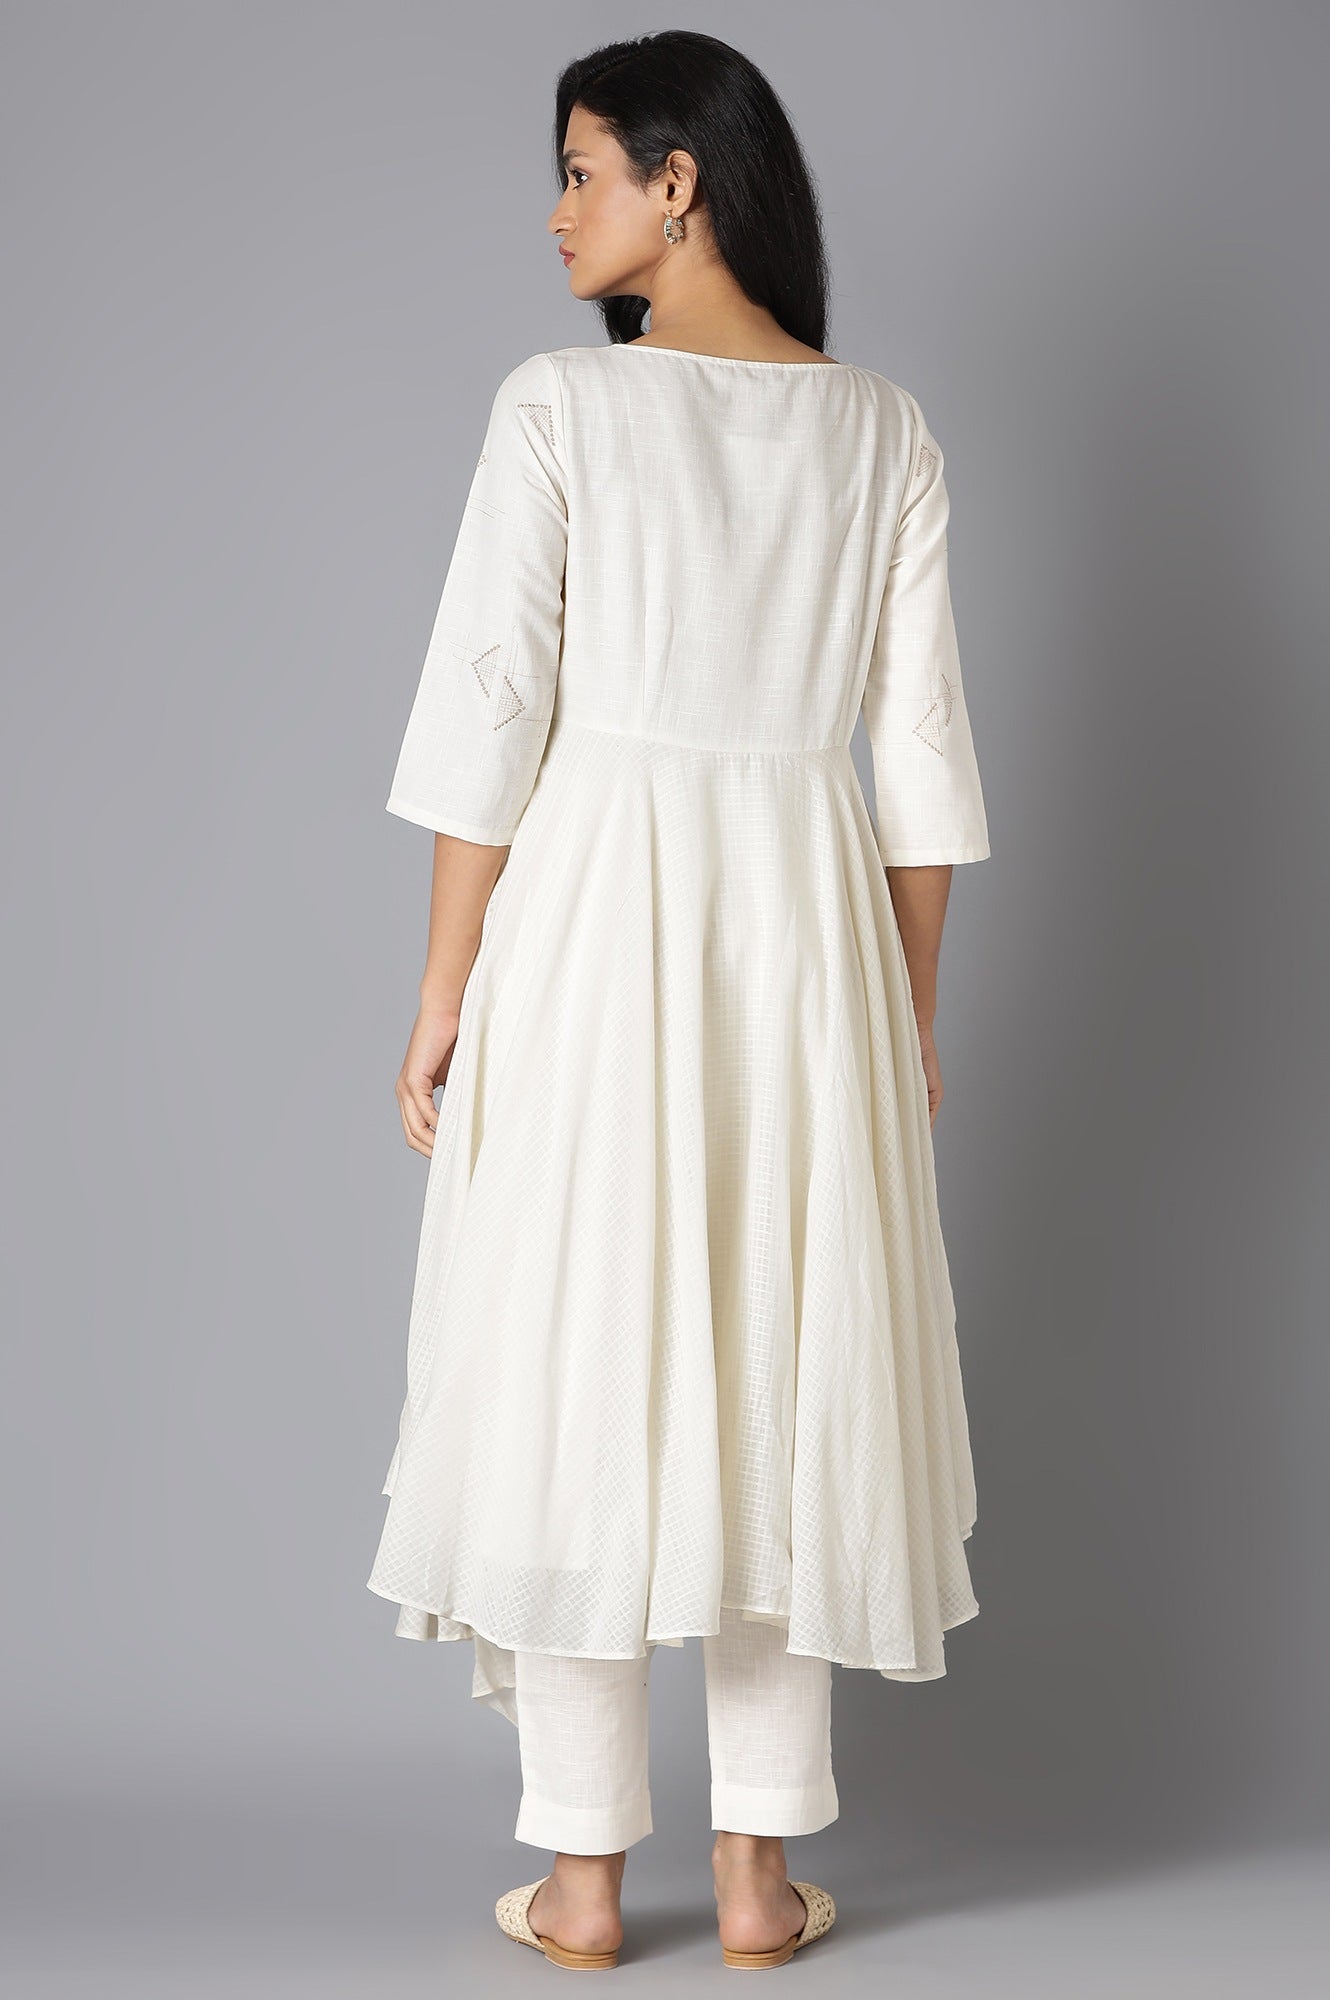 Ecru Embroidered Asymmetrical kurta In Boat Neck With Slim Pants